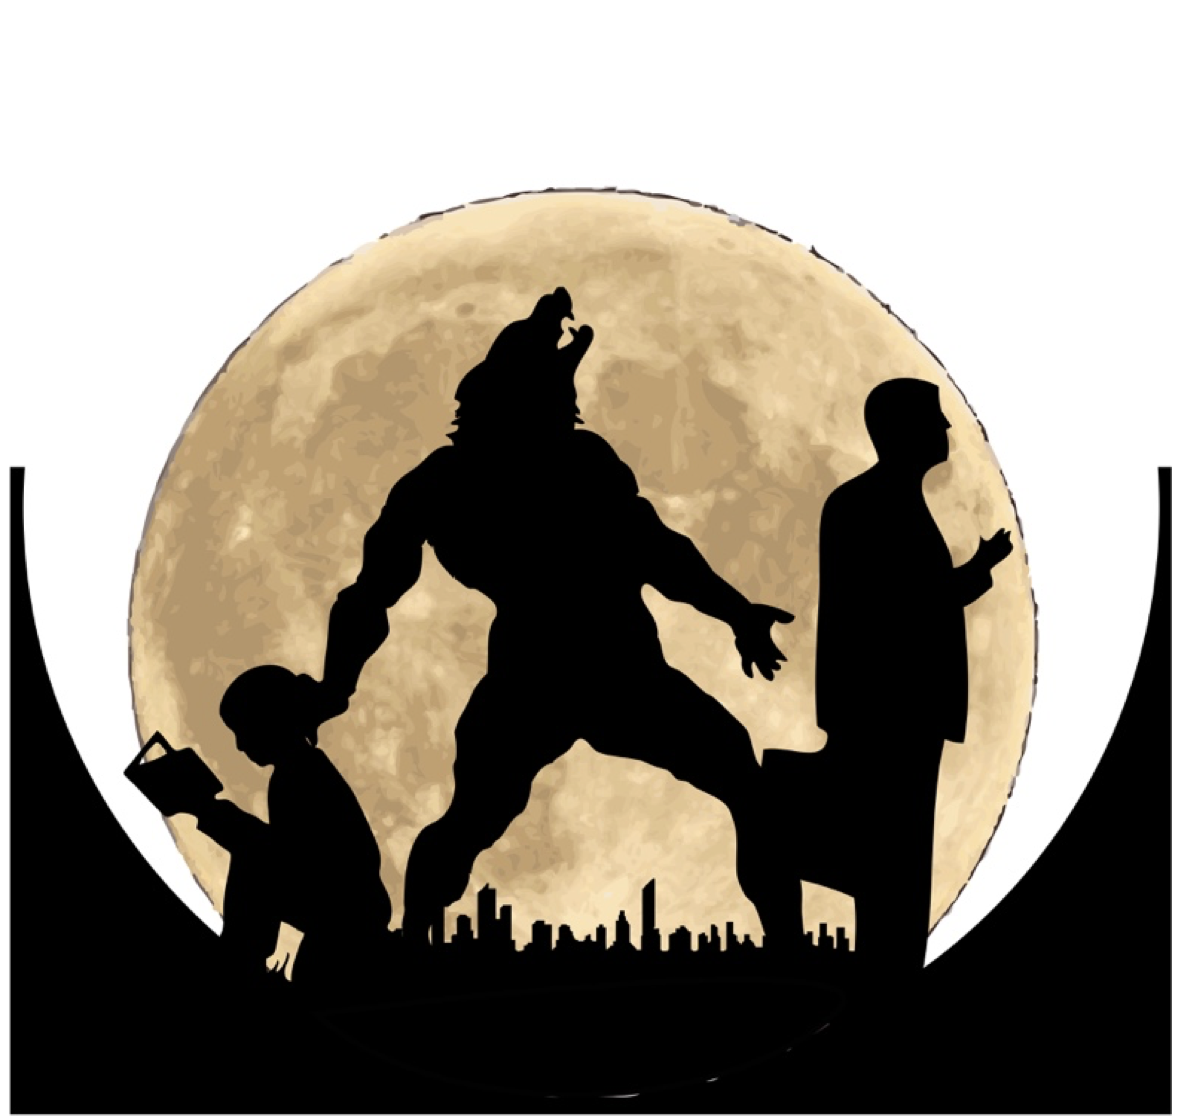 The Beast, the Man and the Child: An Analysis of the Werewolf Archetype and its Meaning to Contemporary Society